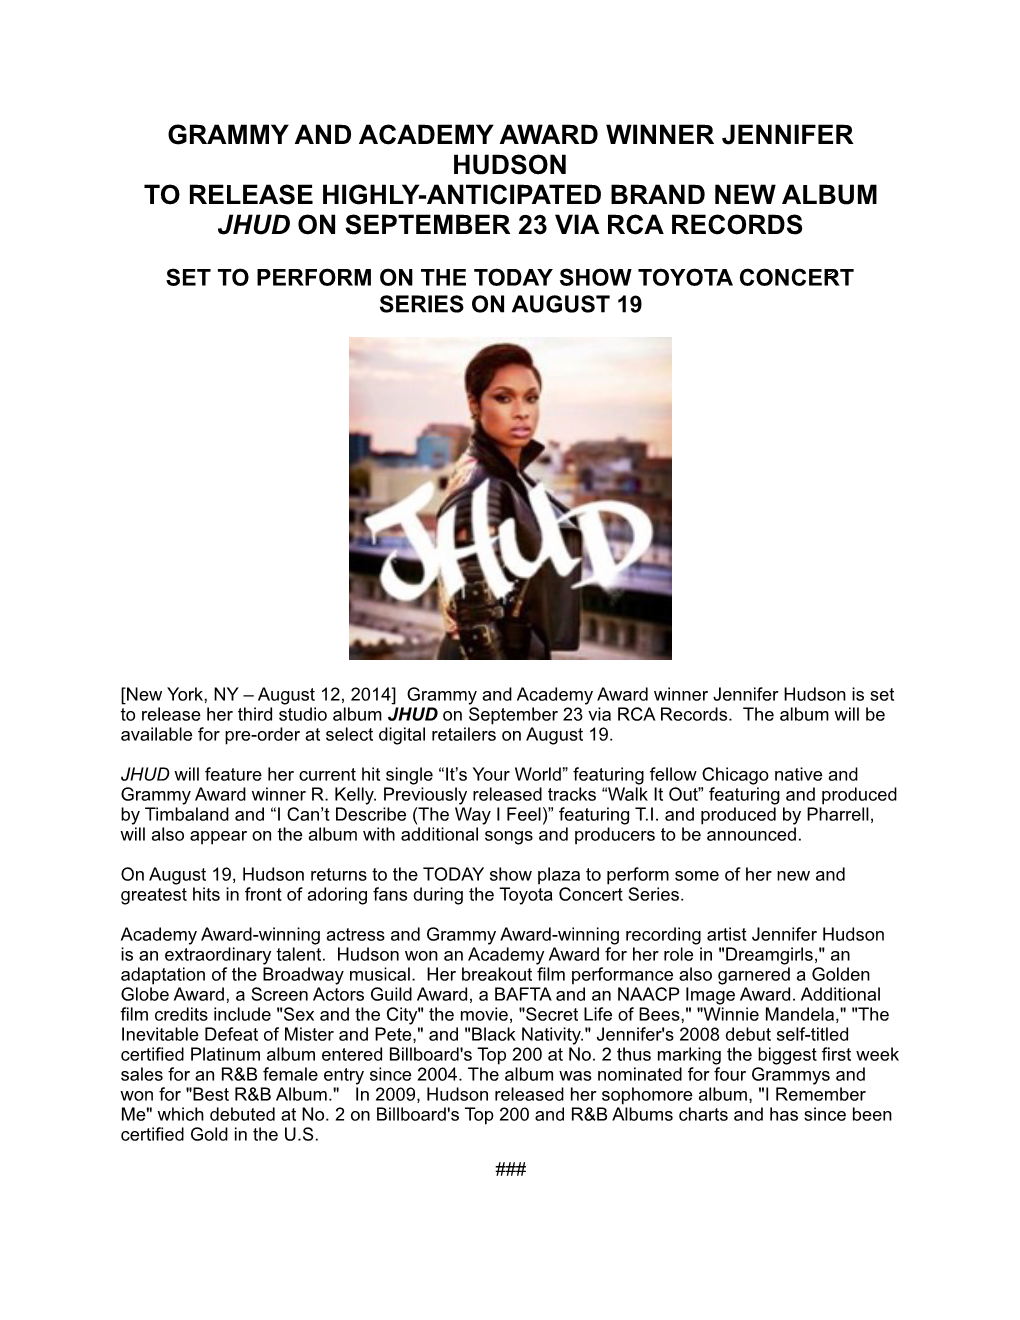 Press Release JH Album Release GRAMMY AND